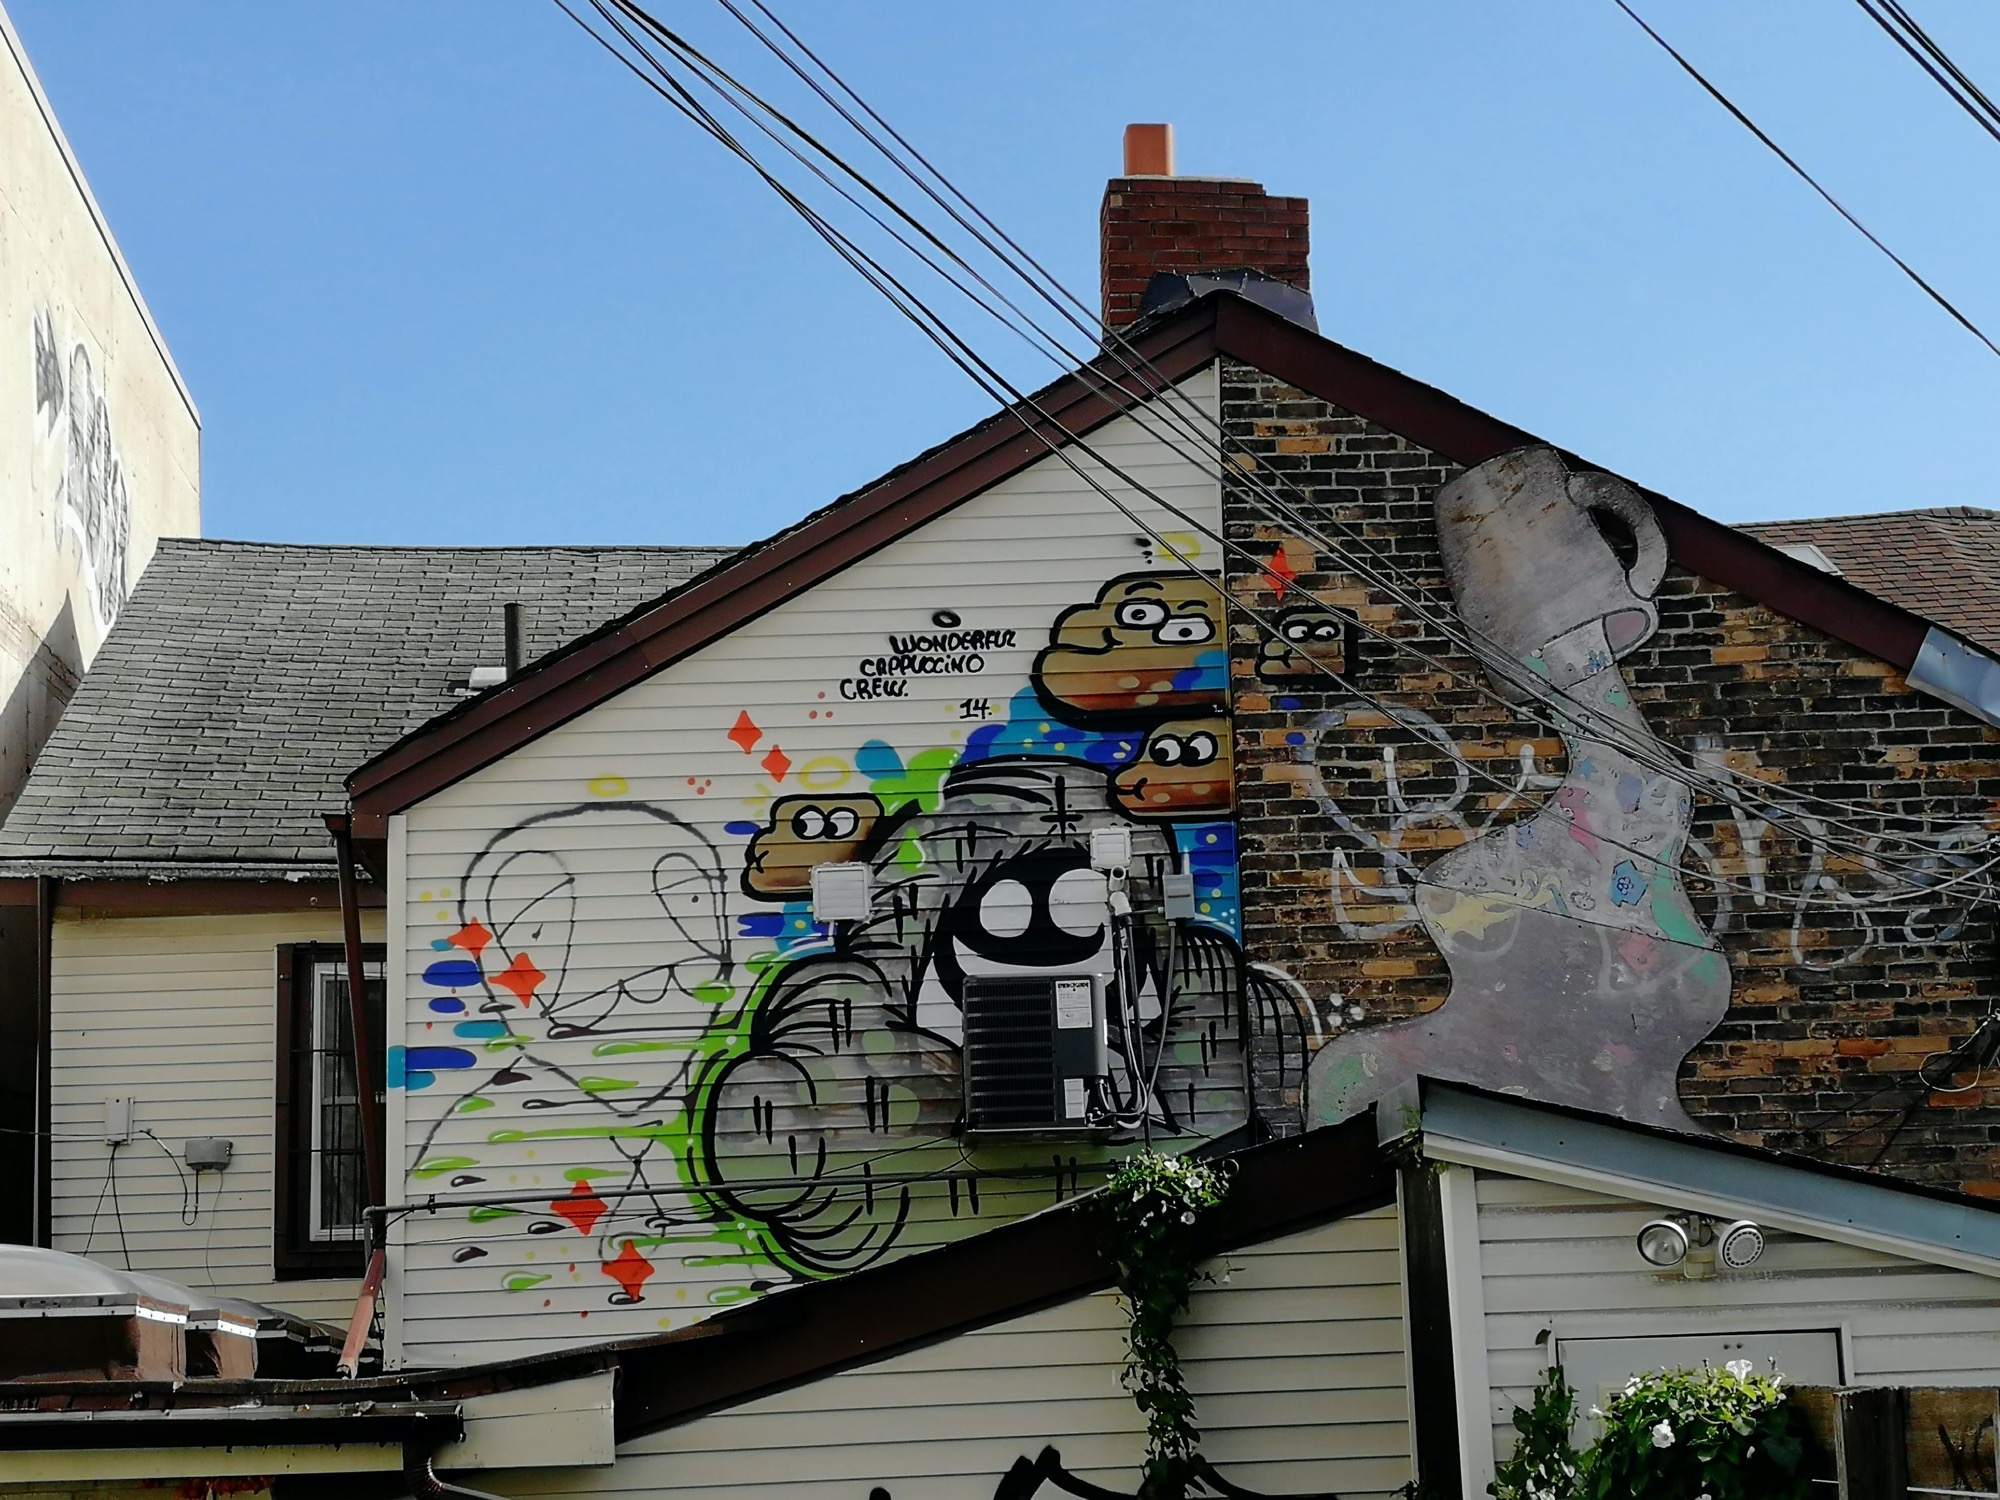 Graffiti 2405  captured by Rabot in Toronto Canada